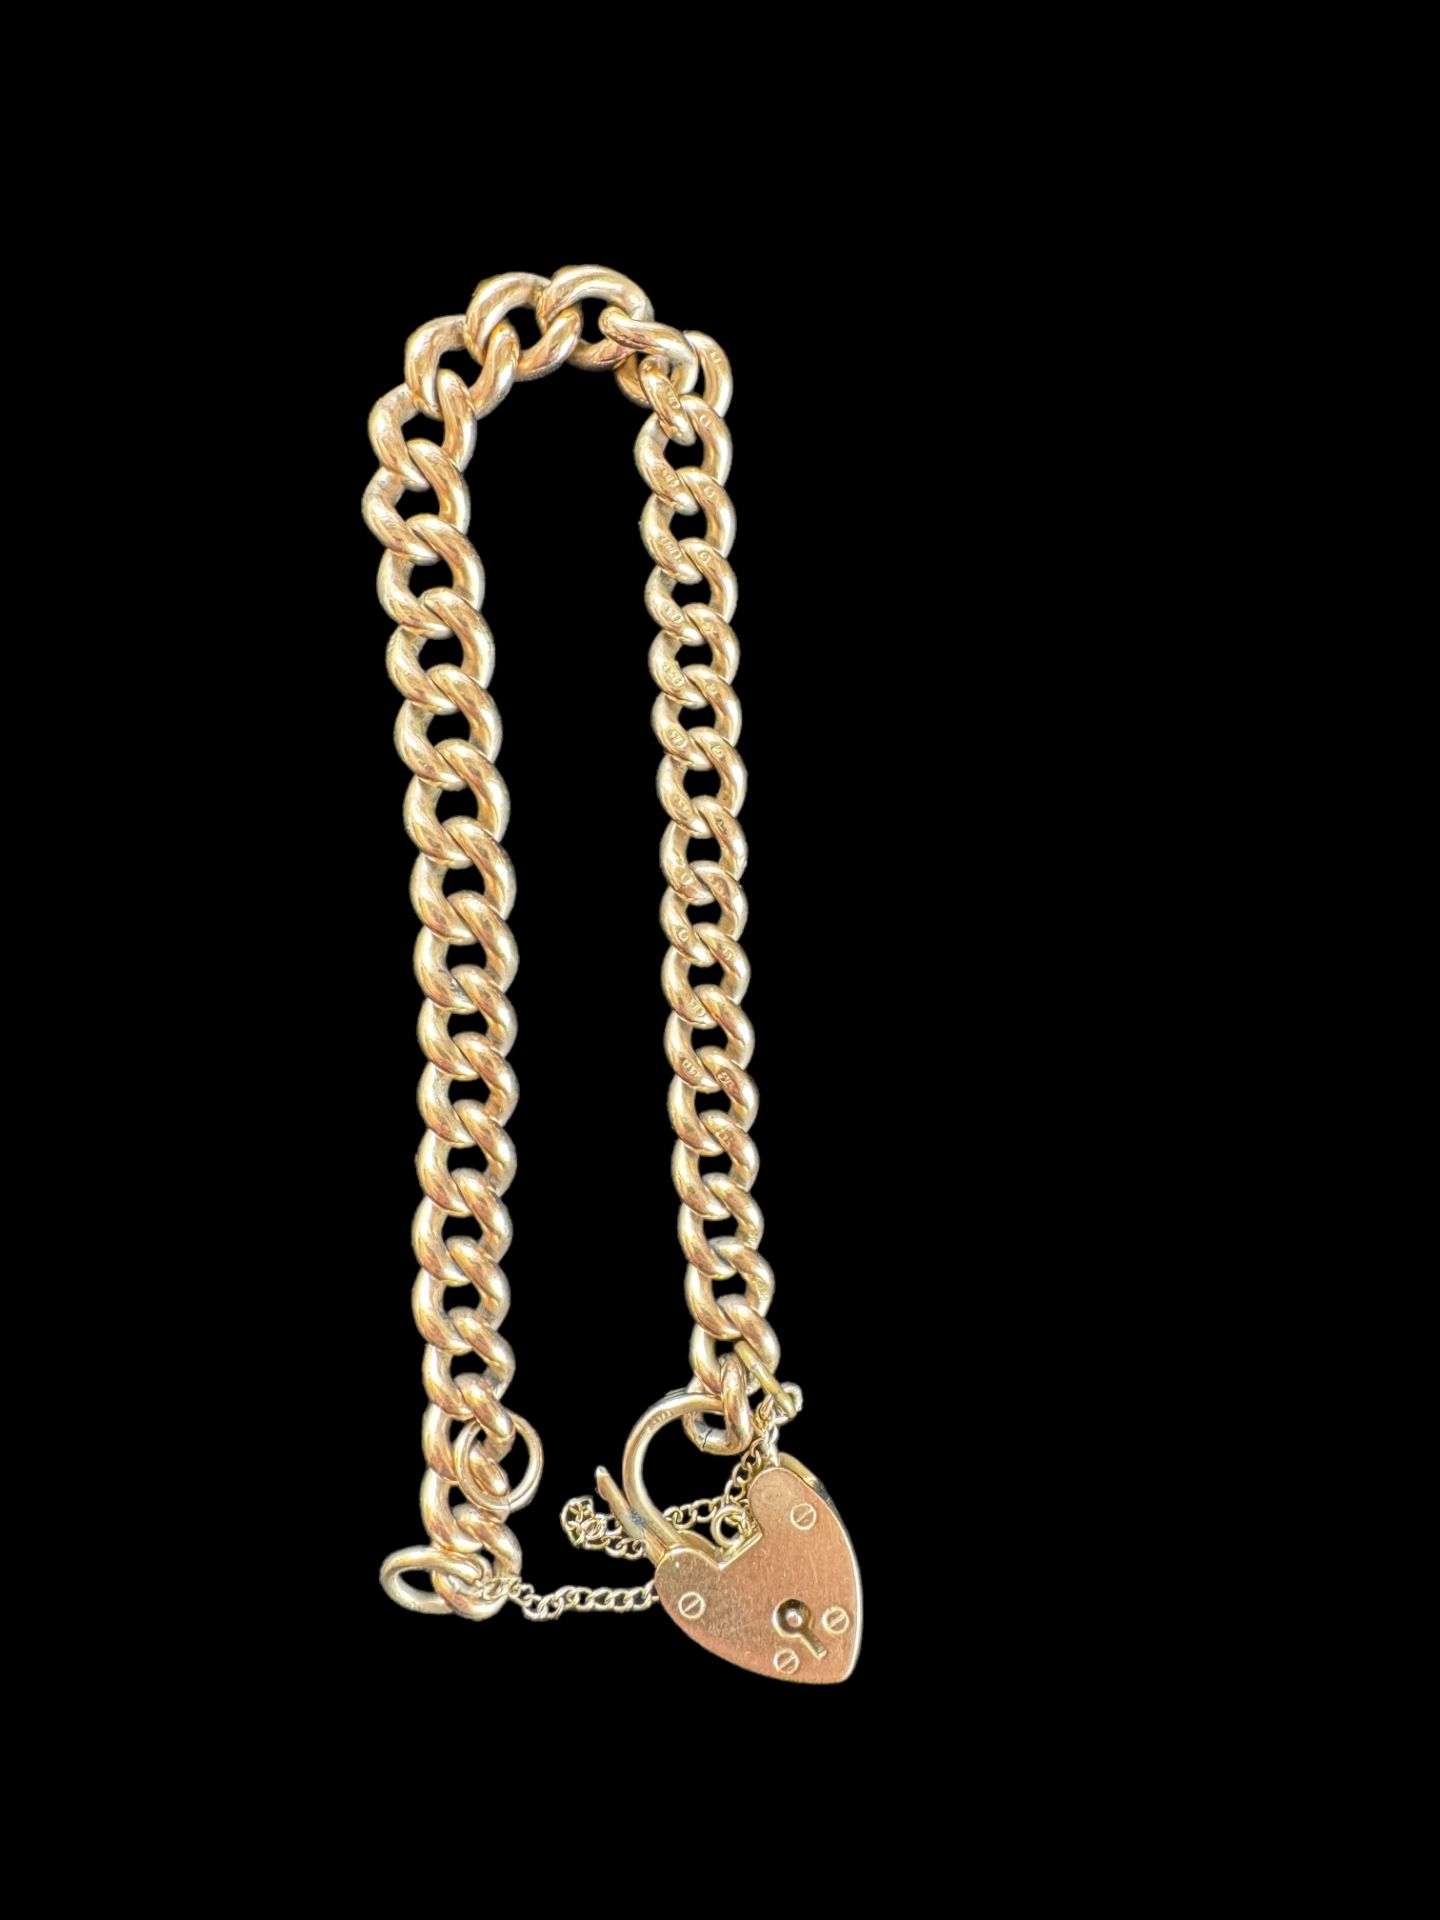 A 9ct gold graduated curblink bracelet with 9ct gold heart padlock clasp - Image 2 of 3